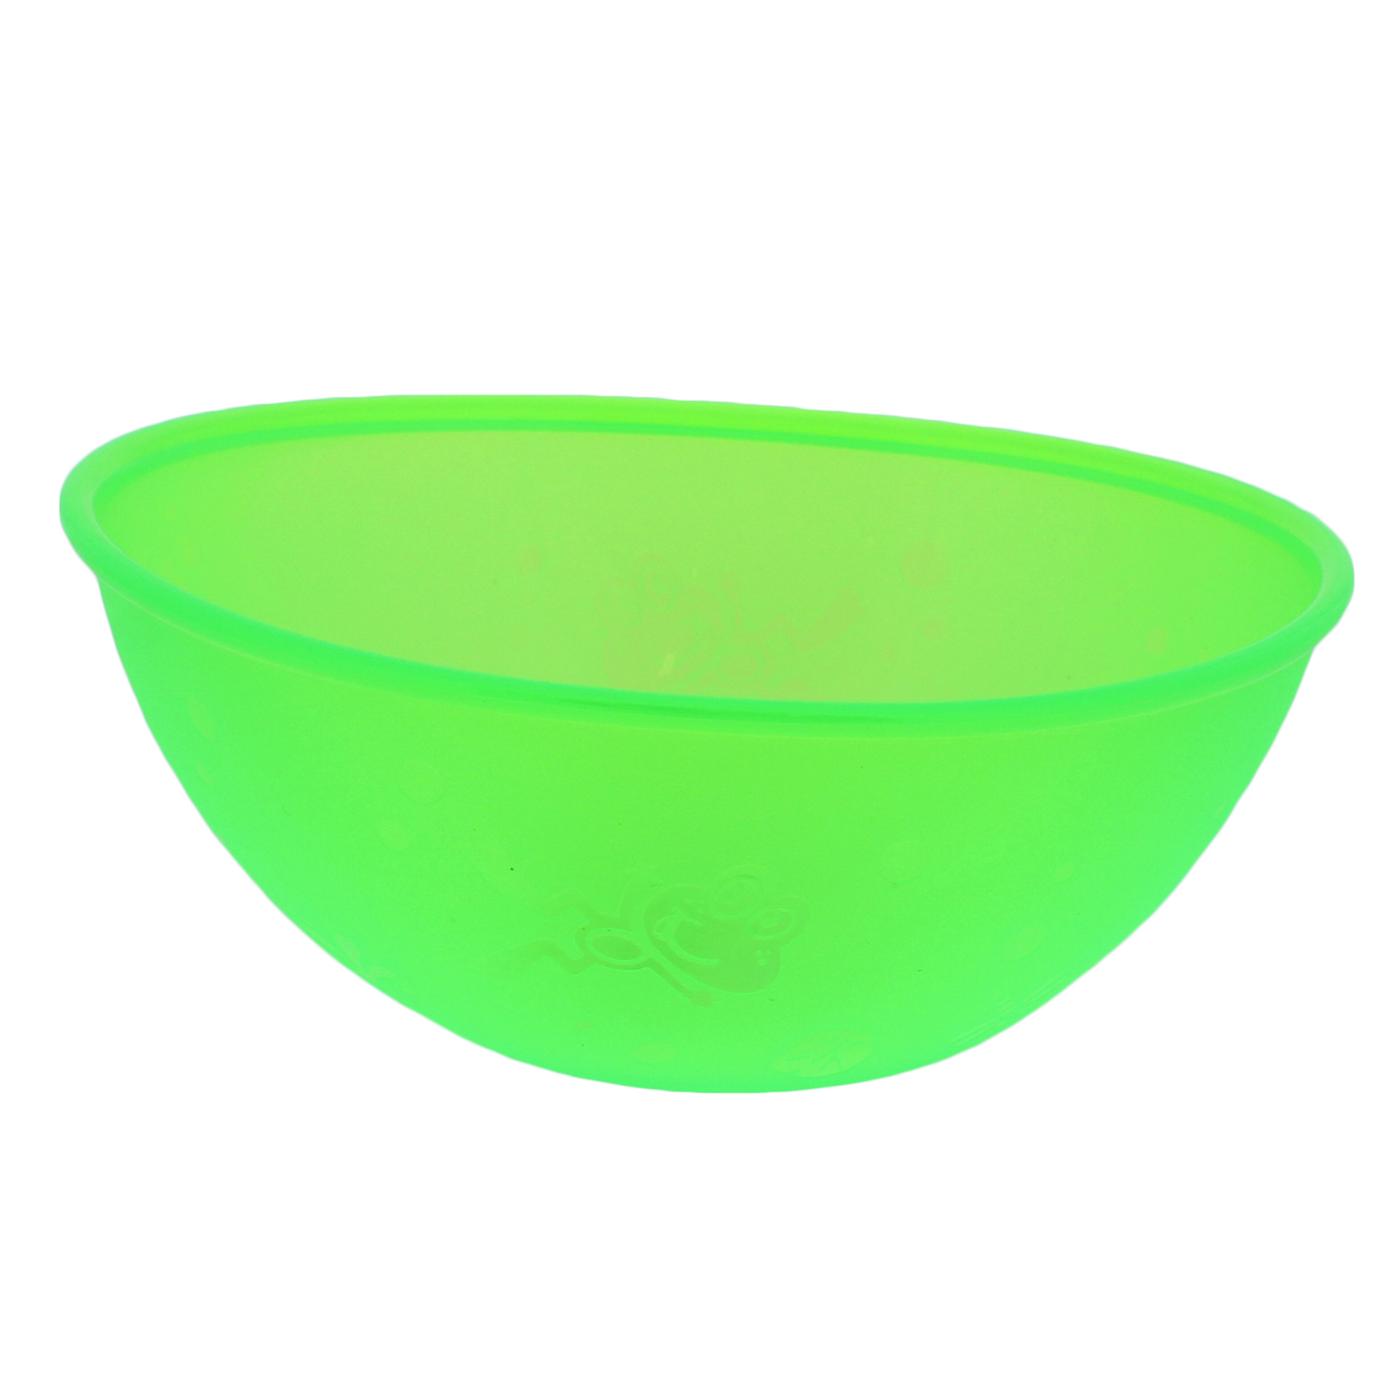 Nuby Embossed Value Feeding Bowl, Assorted Colors; image 4 of 6